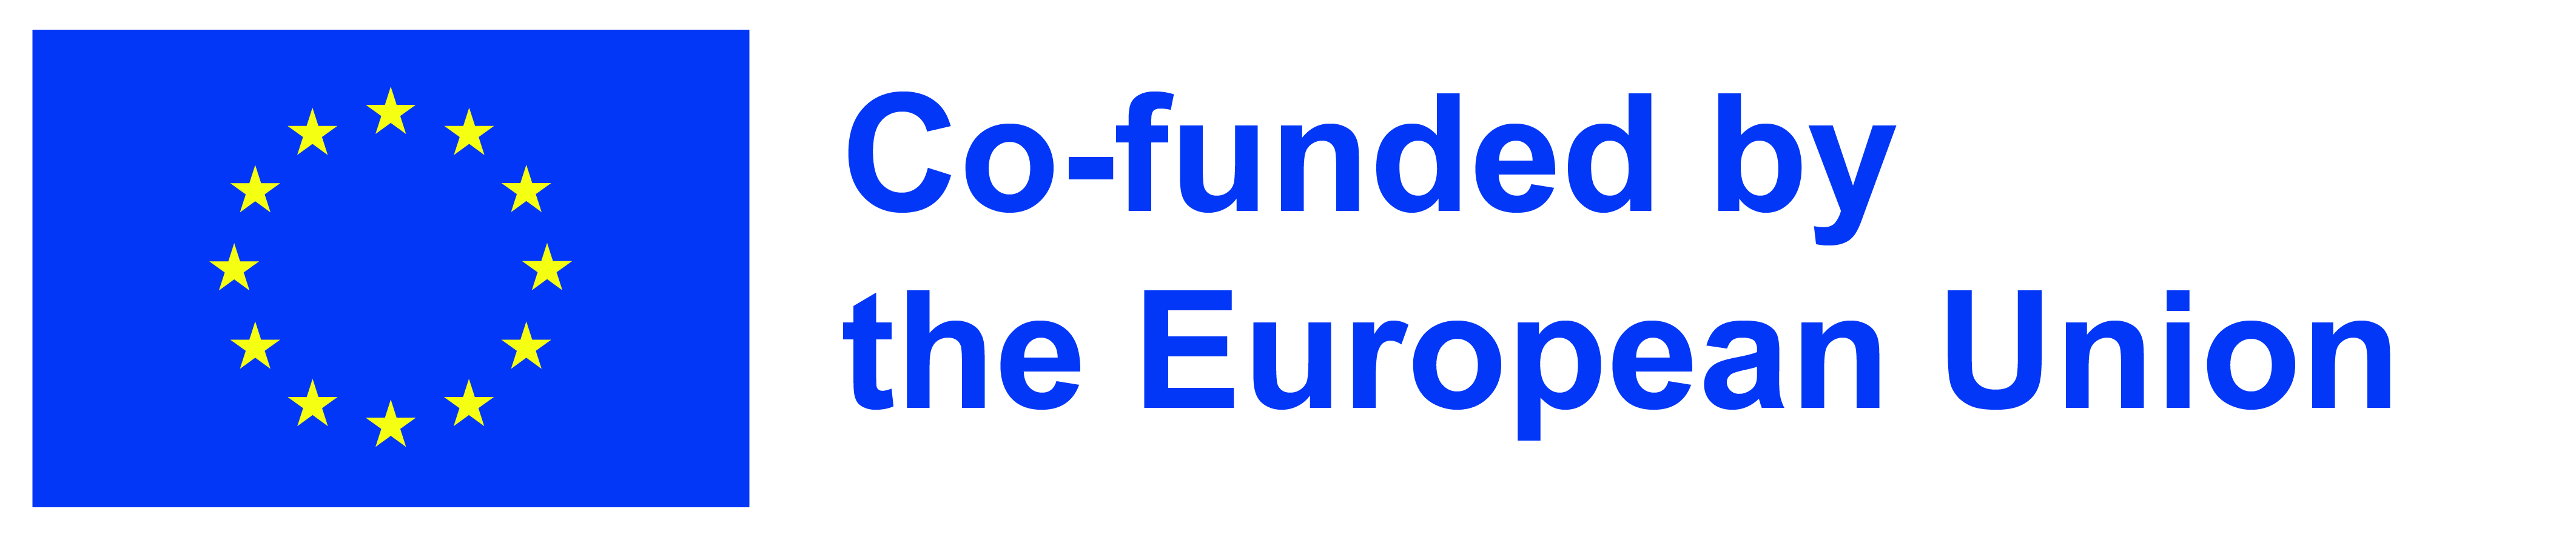 EU flag and cofunded text